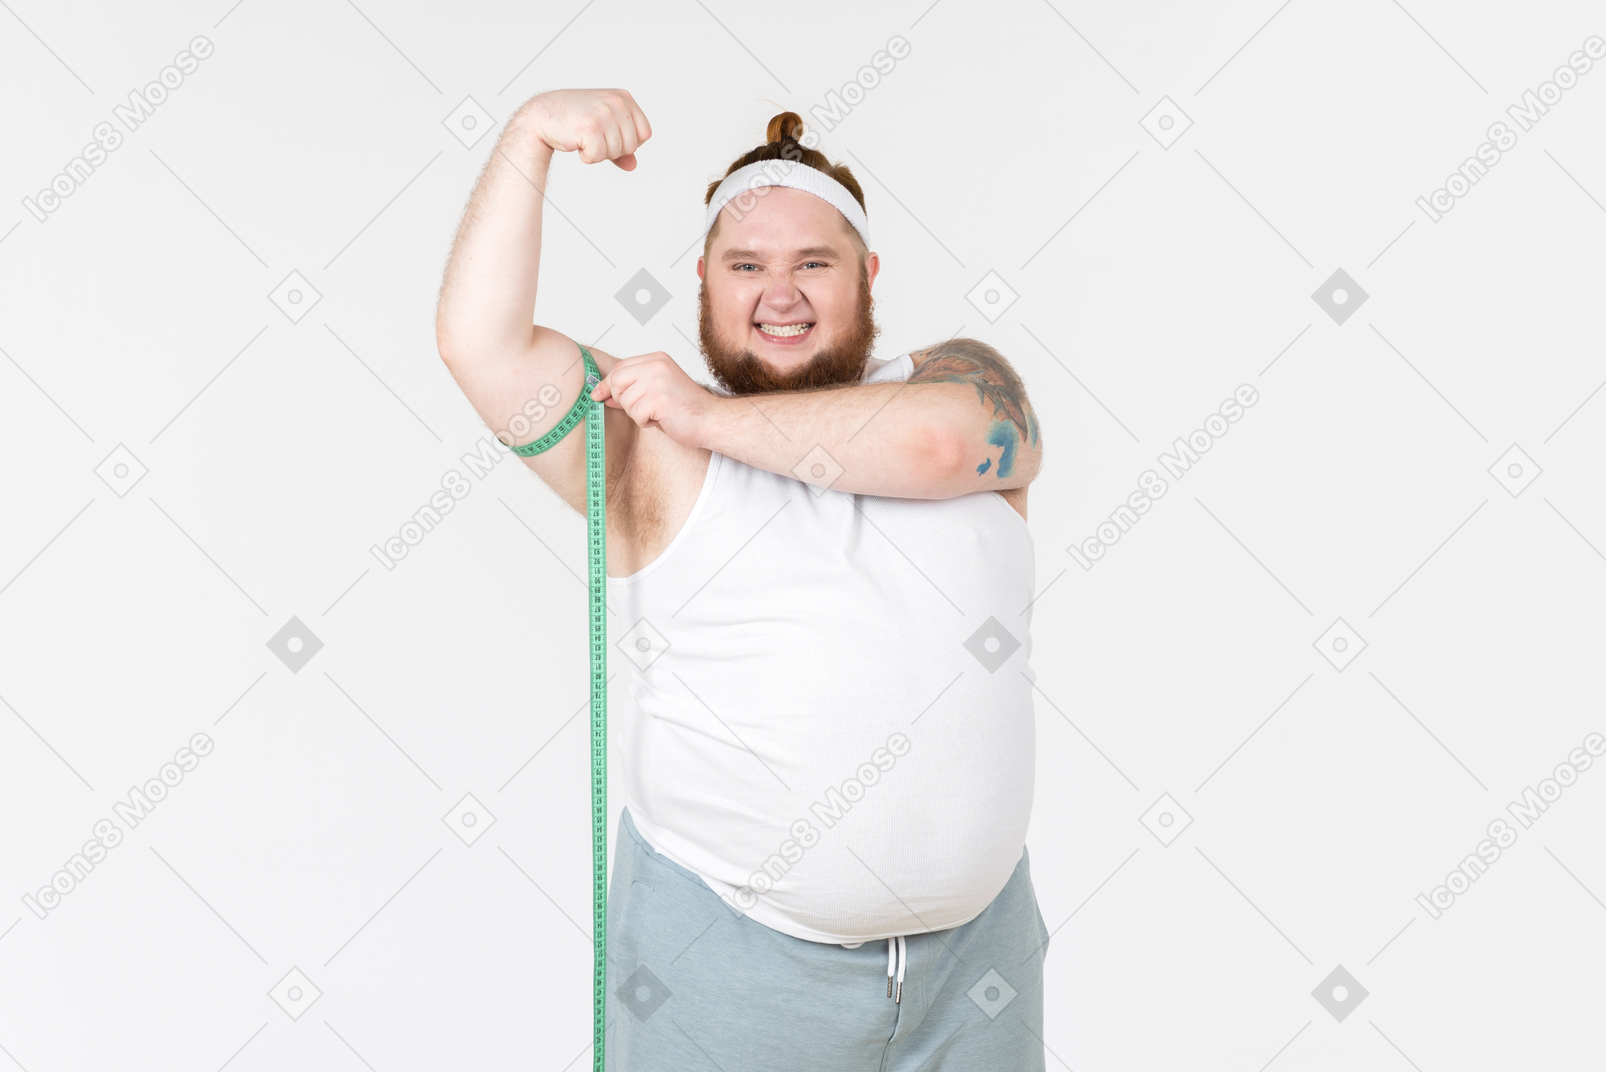 Big sportsman measuring his arm with cloth ruler